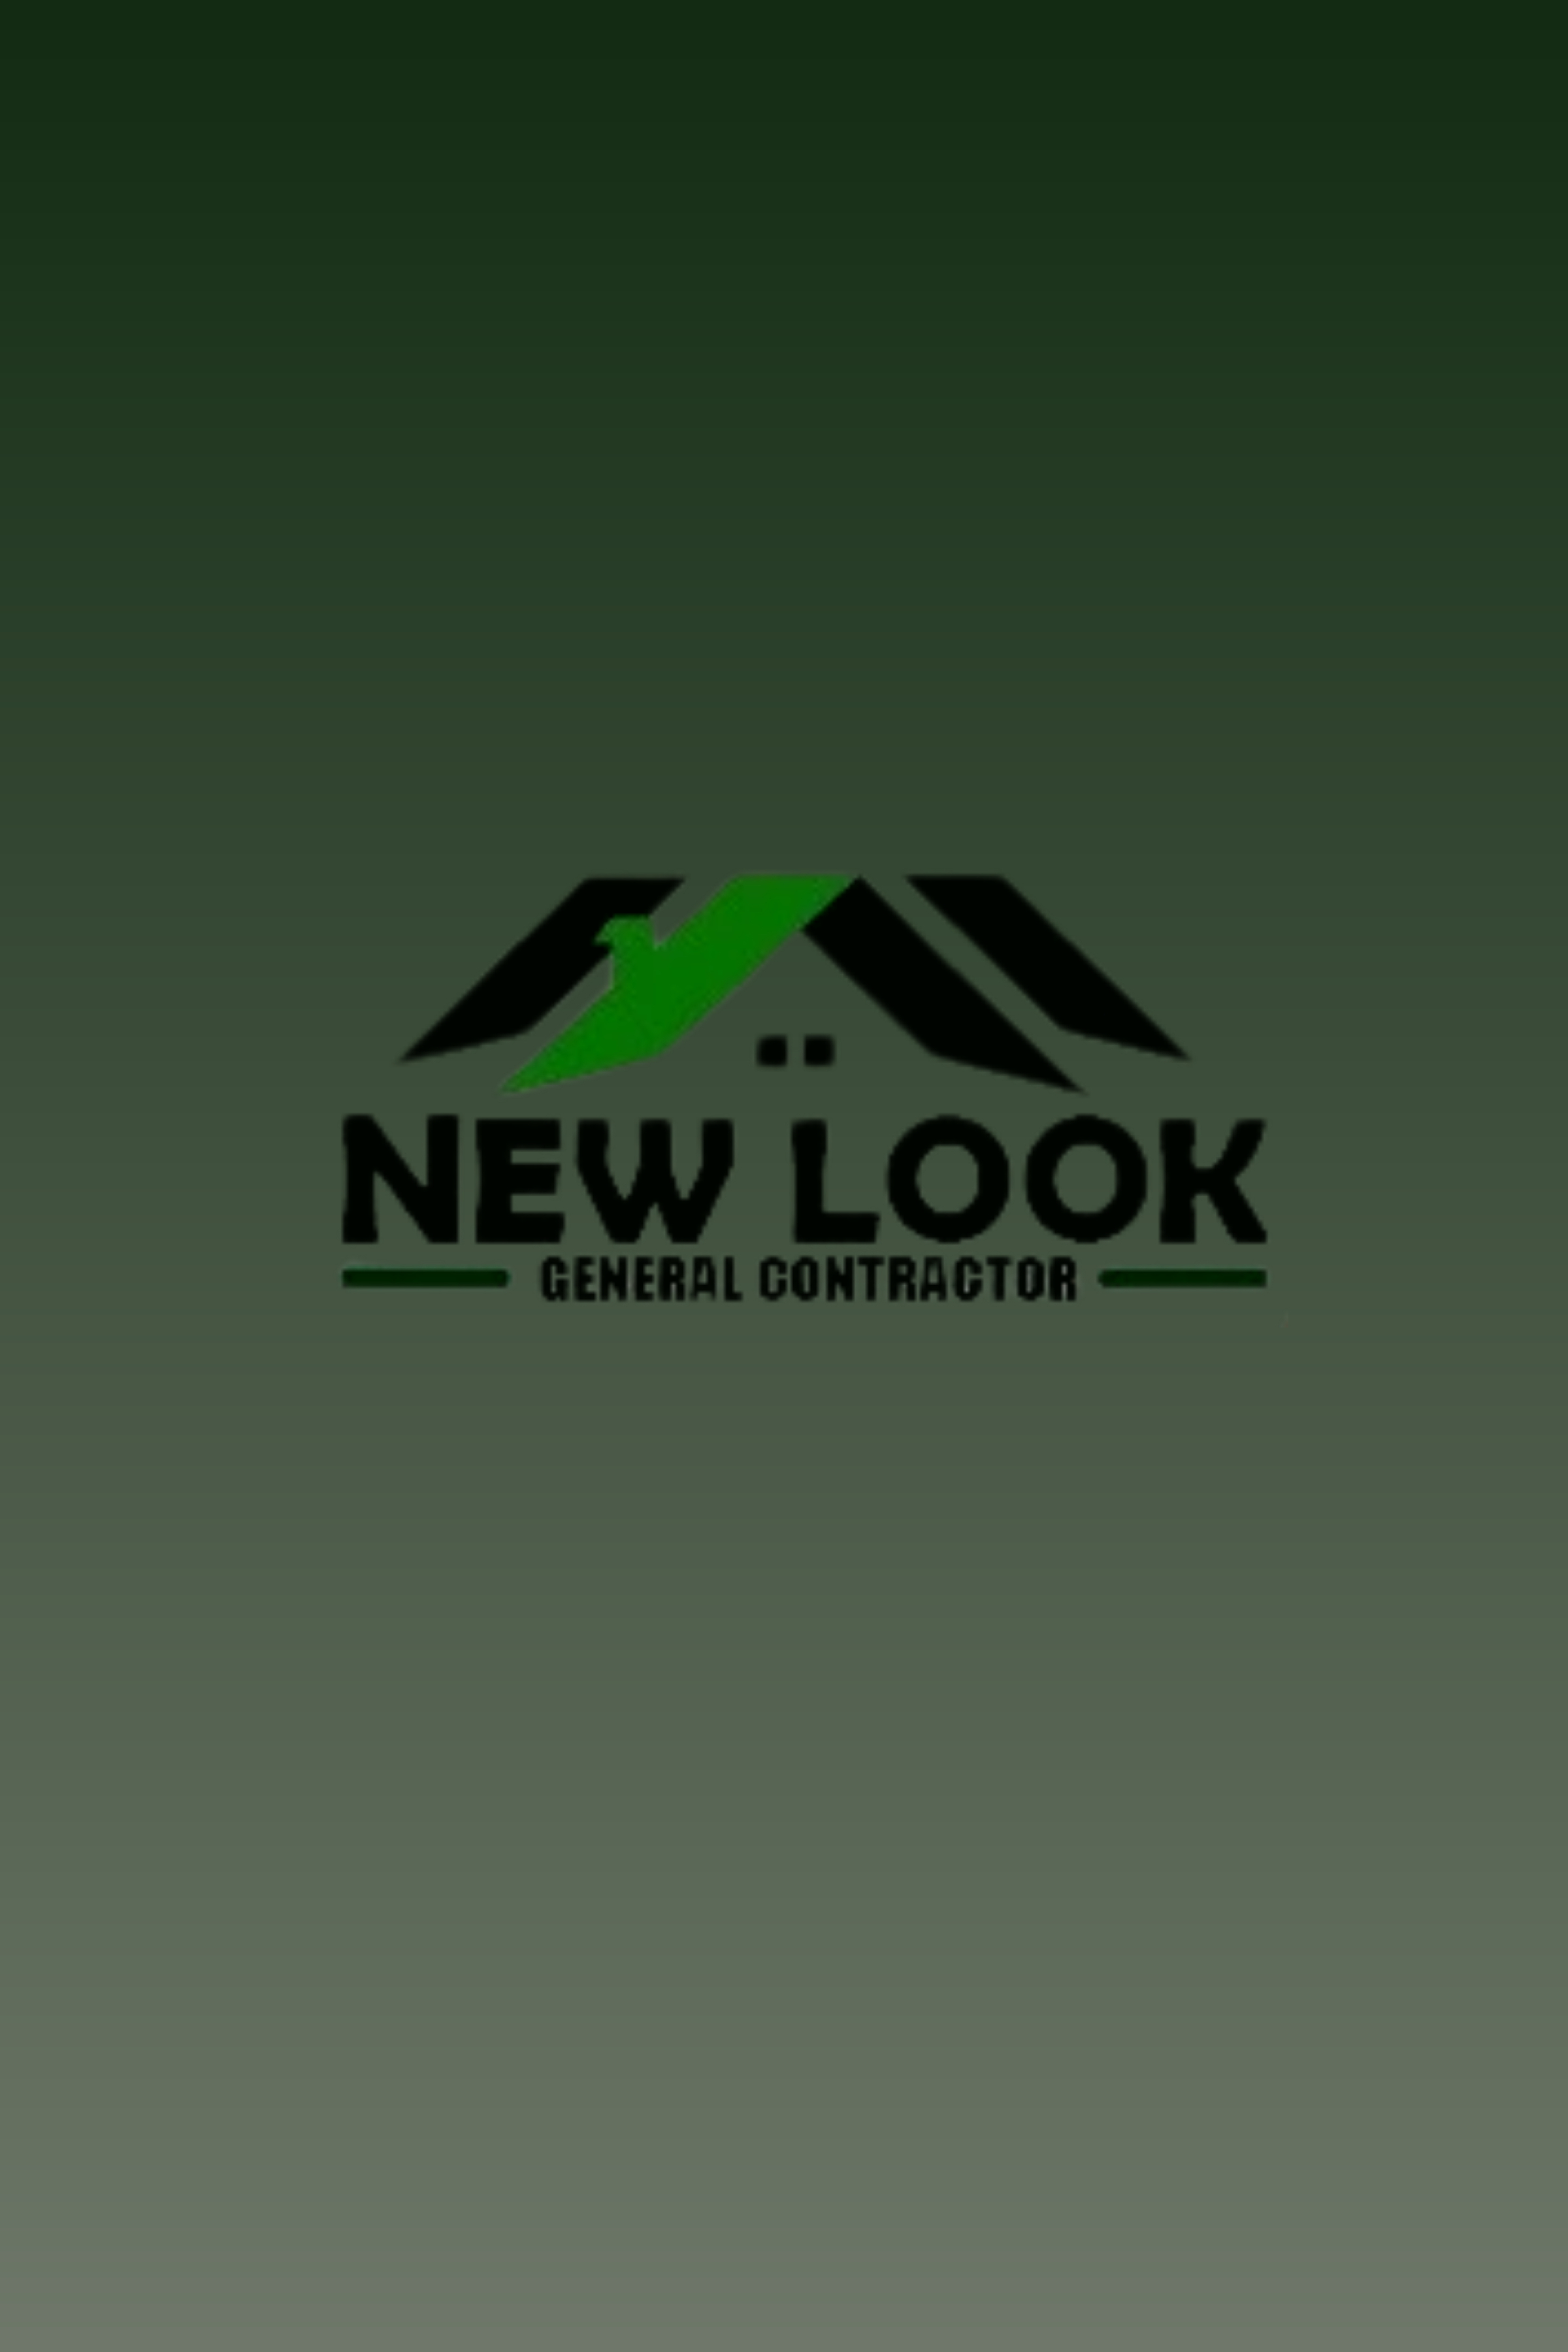 New Look Roofing Logo